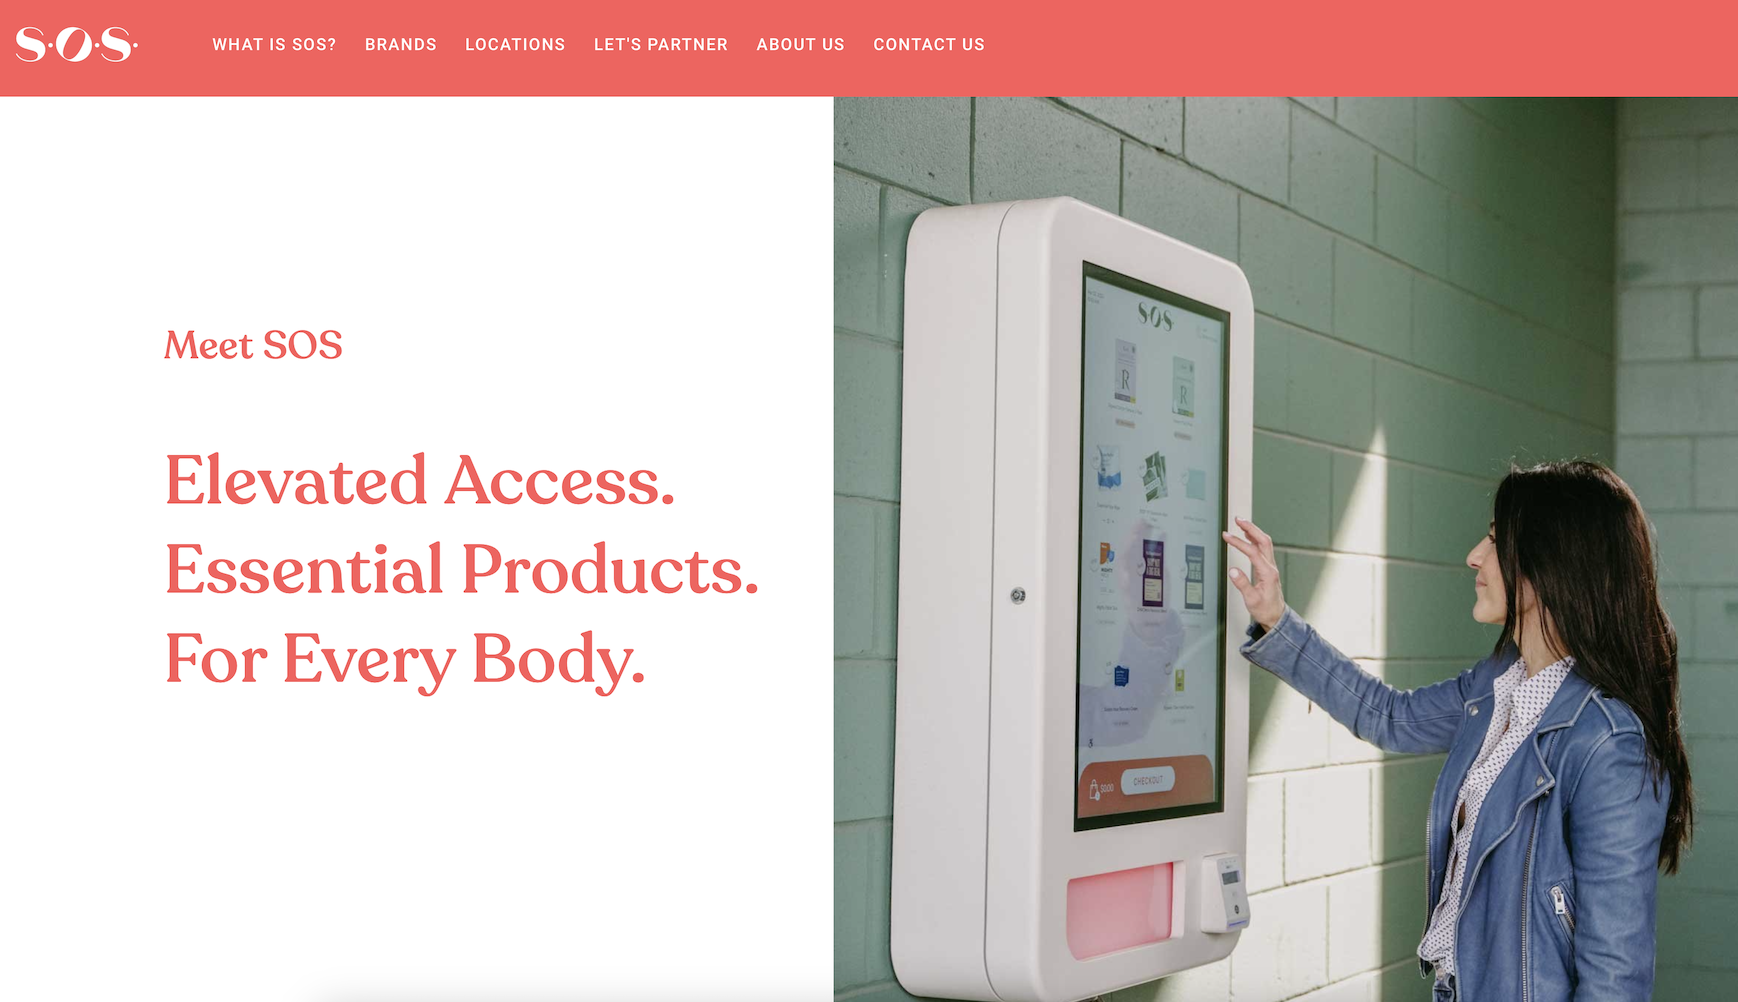 SOS Secures $7.6 Million Funding to Bring Convenient Personal Care and Health Products to High-Traffic Areas